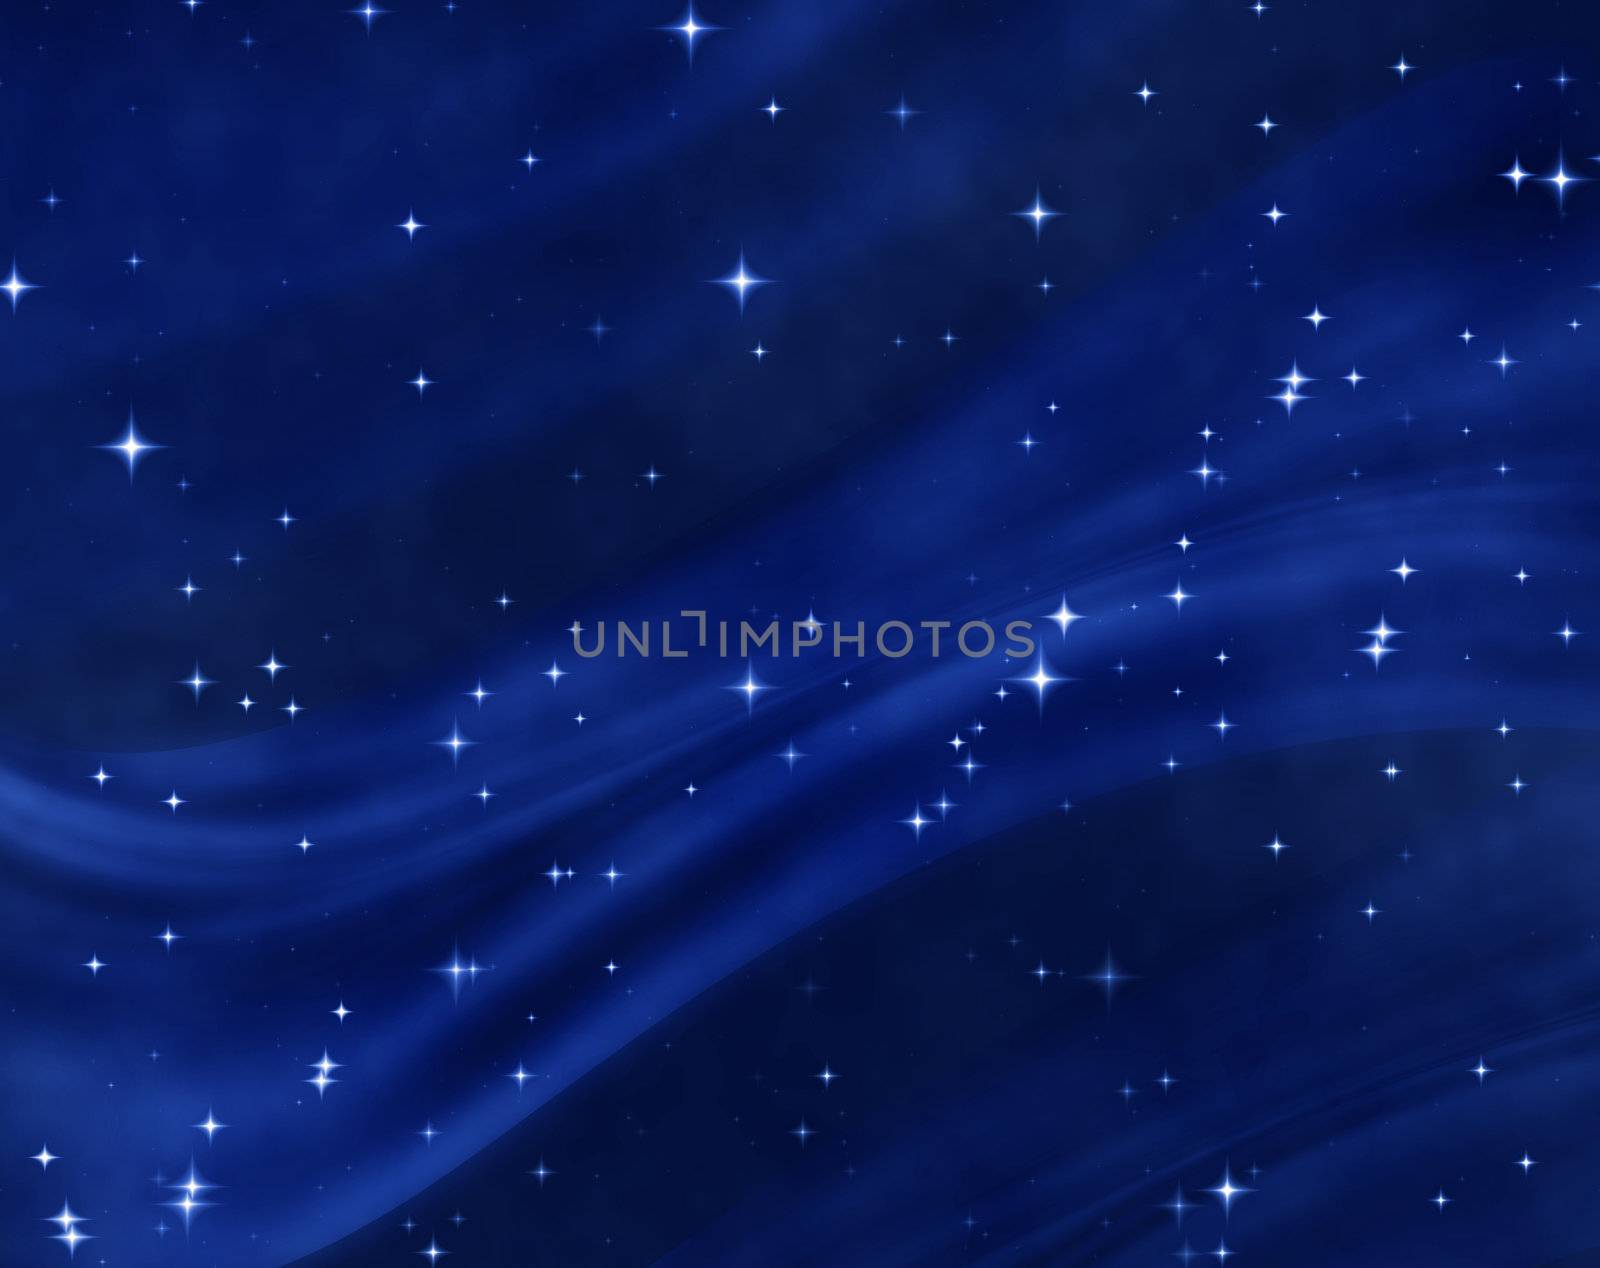 a nice blue star field of bright and shining stars